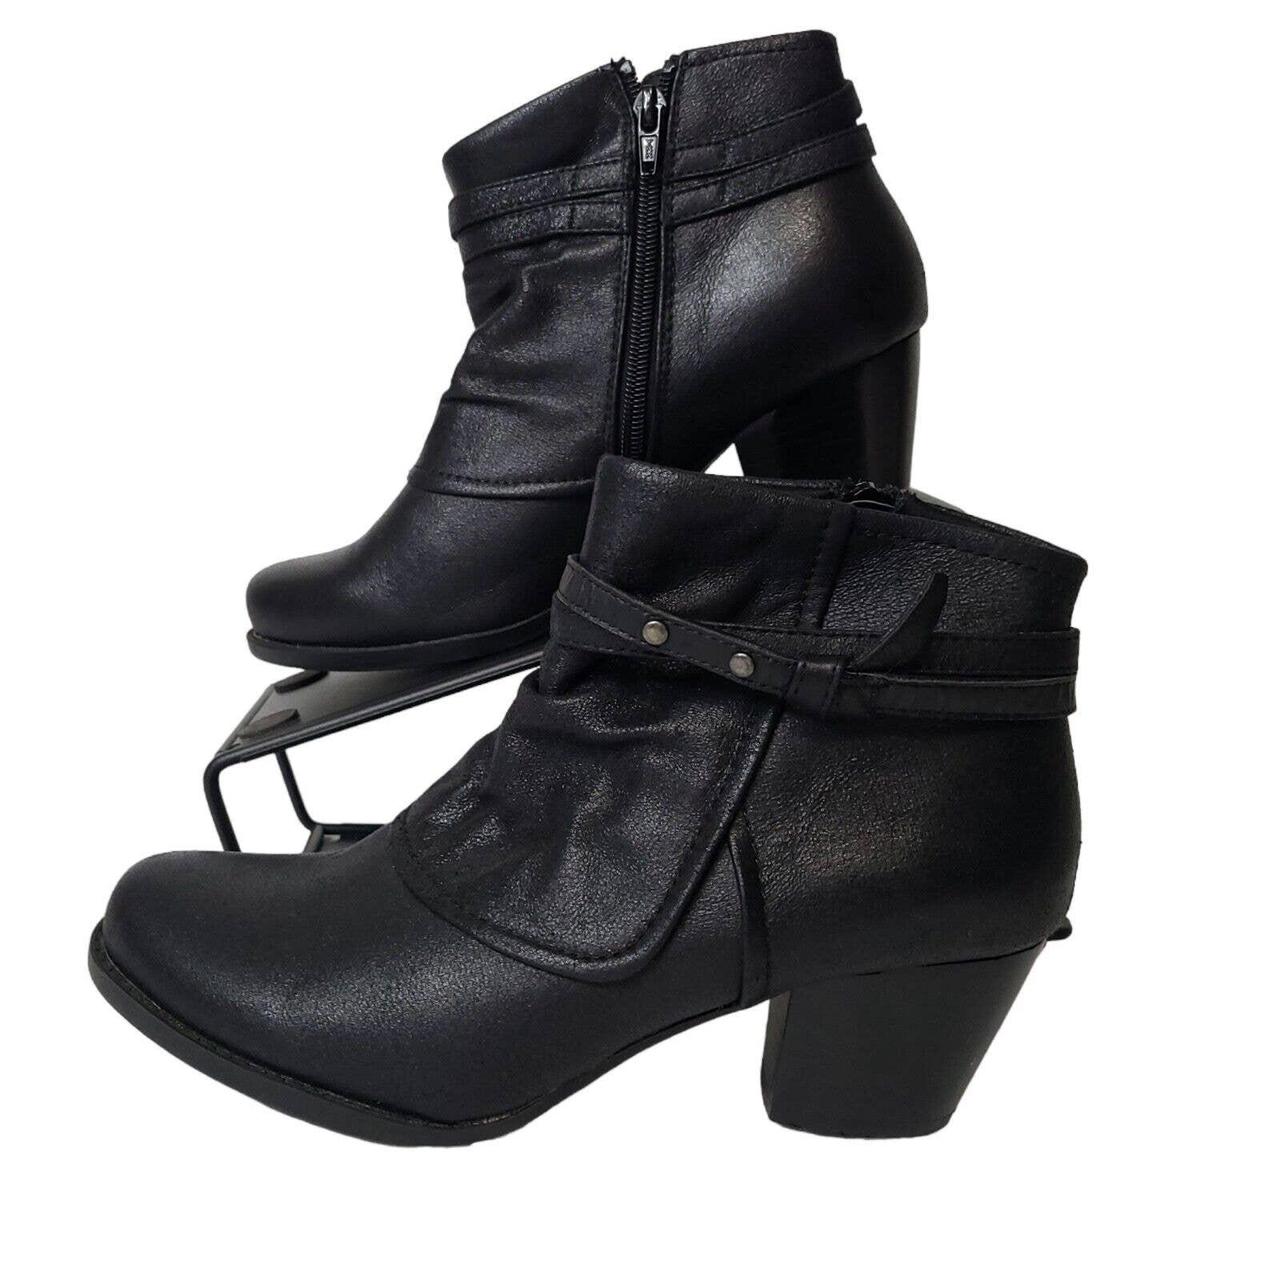 Rhapsody leather ankle boots